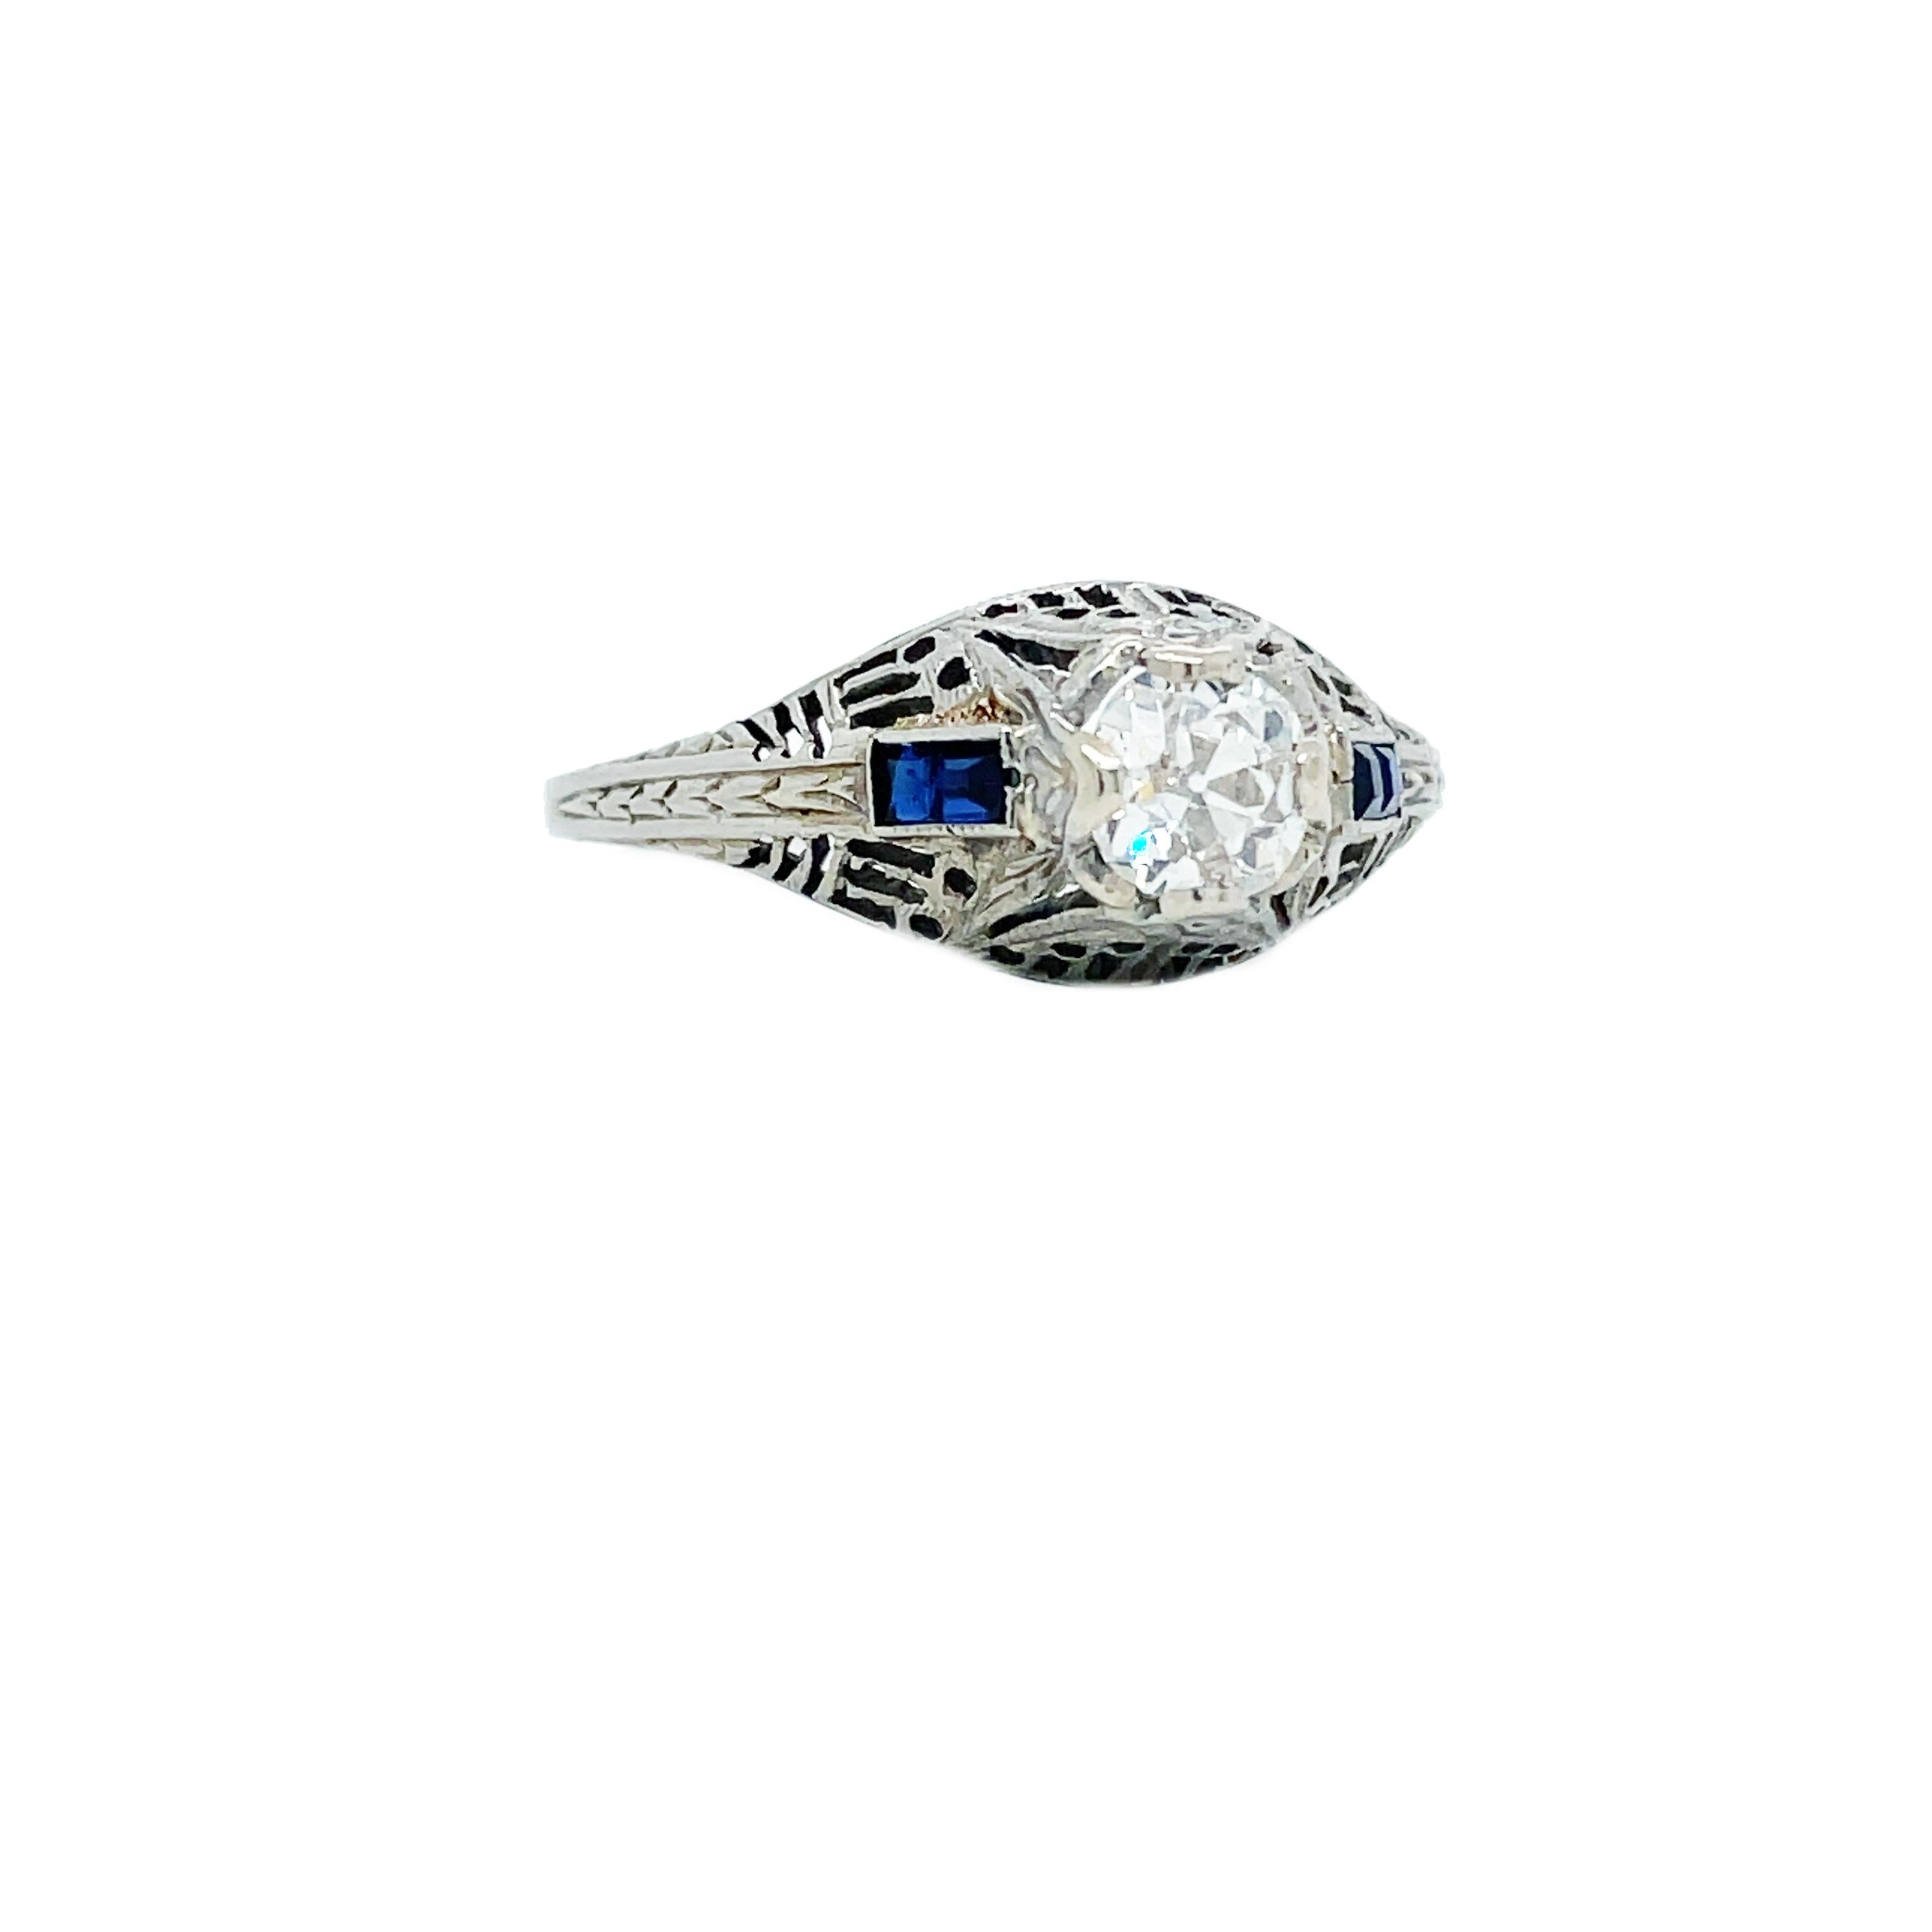 Old Mine Cut 1915 Art Deco Diamond and Sapphire White Gold Filigree Ring with GIA Cert.